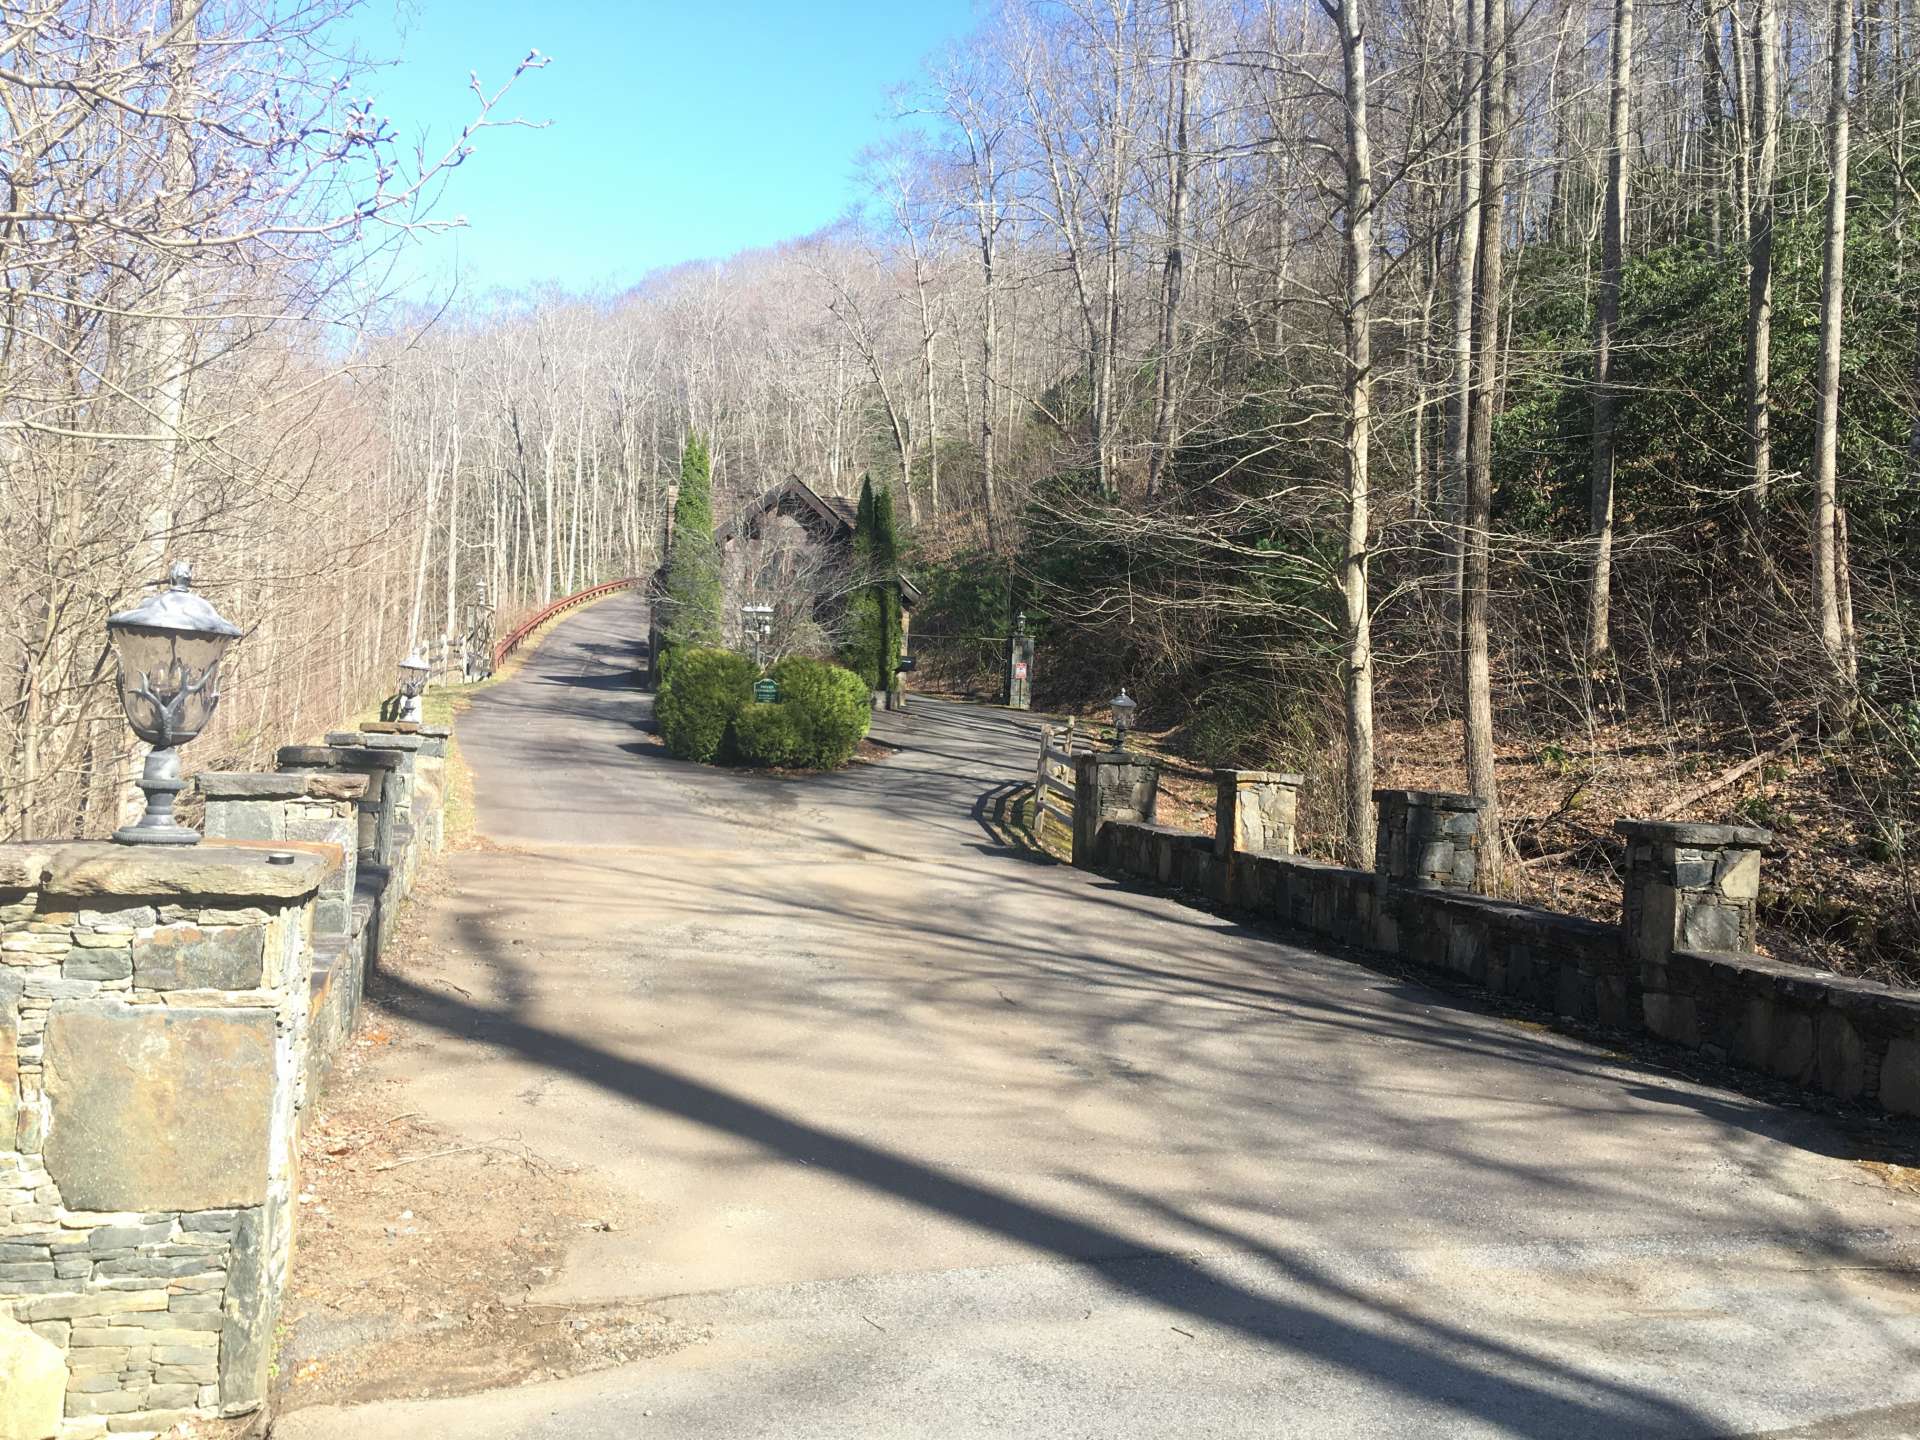 A gated community greatly adds security for your mountain retreat investment.